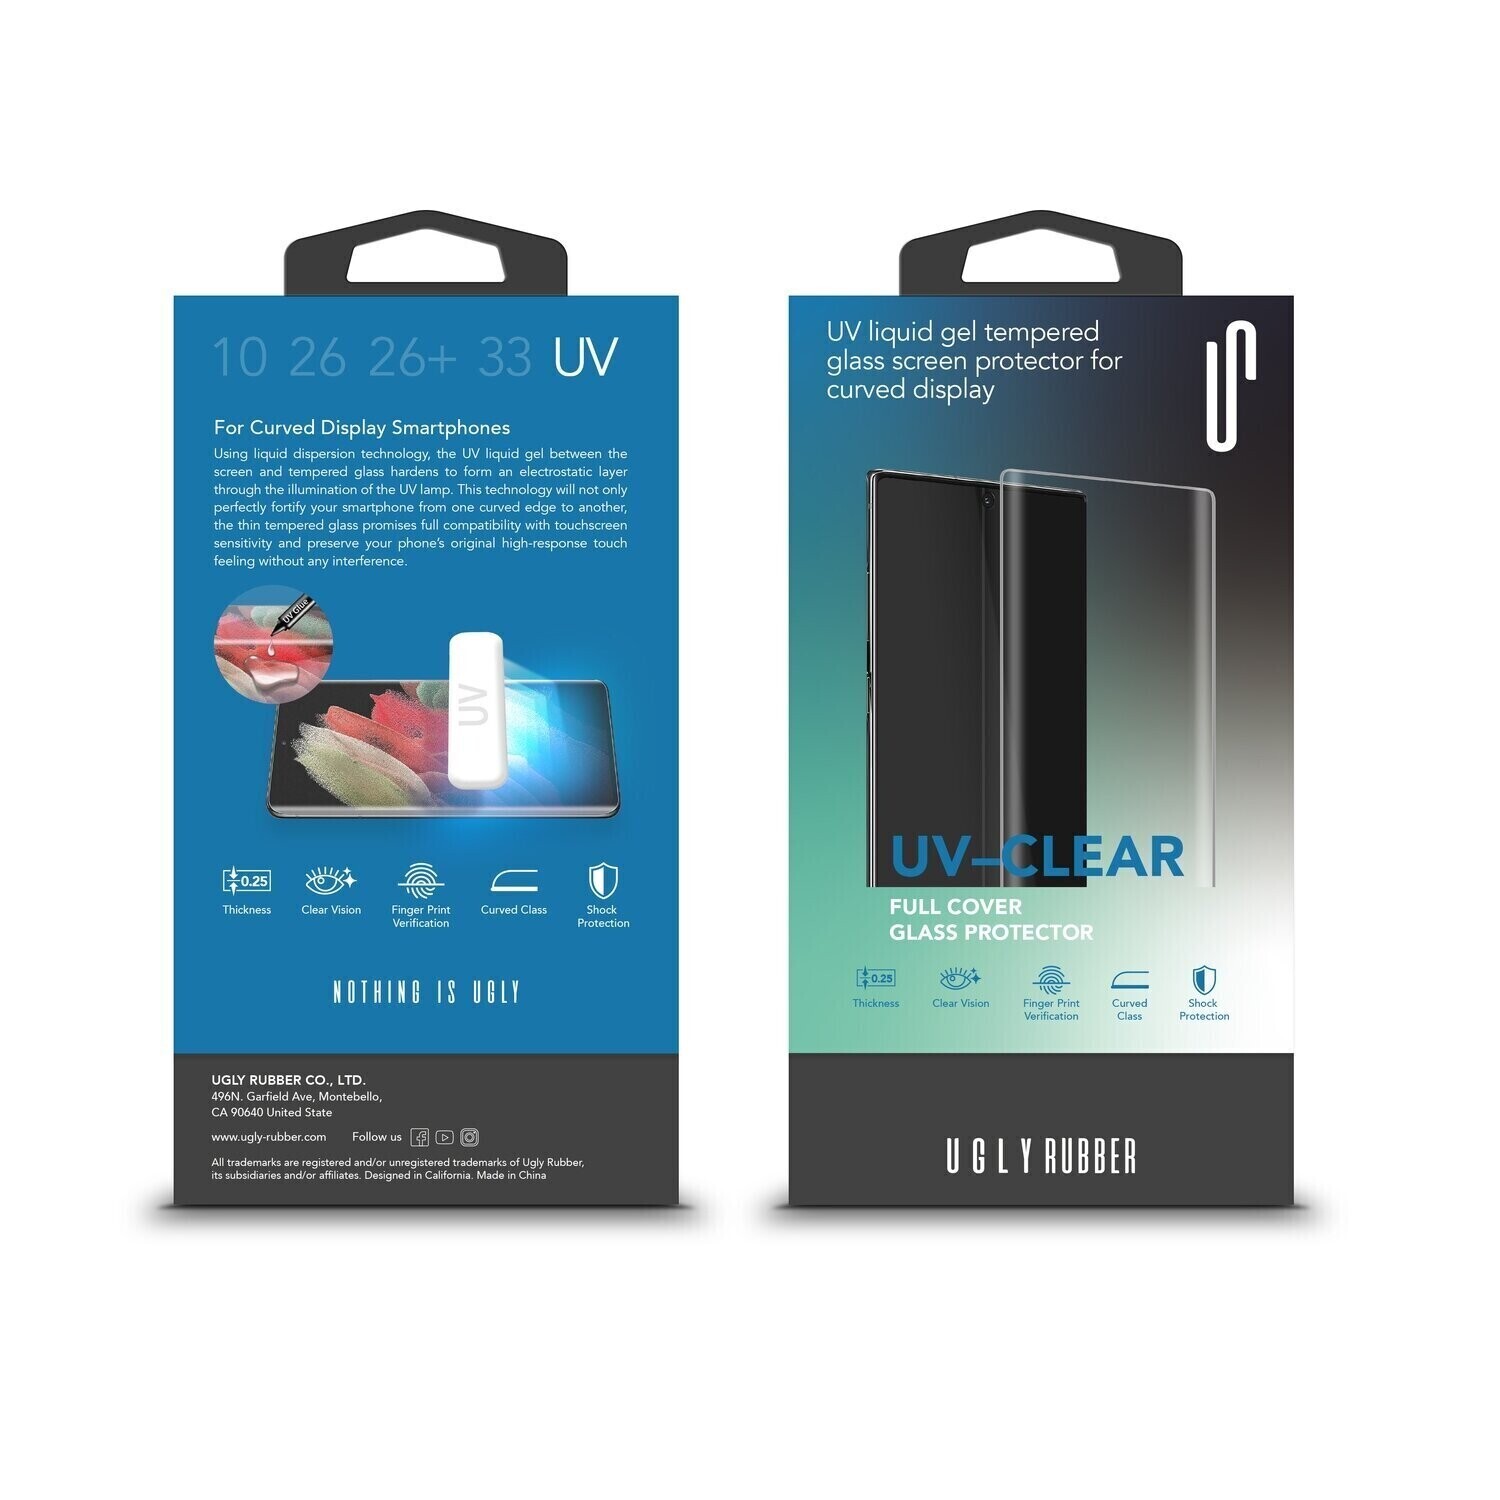 Ugly Rubber Oneplus 8 Pro UV Liquid Gel Tempered Glass, Clear (Screen Protector)